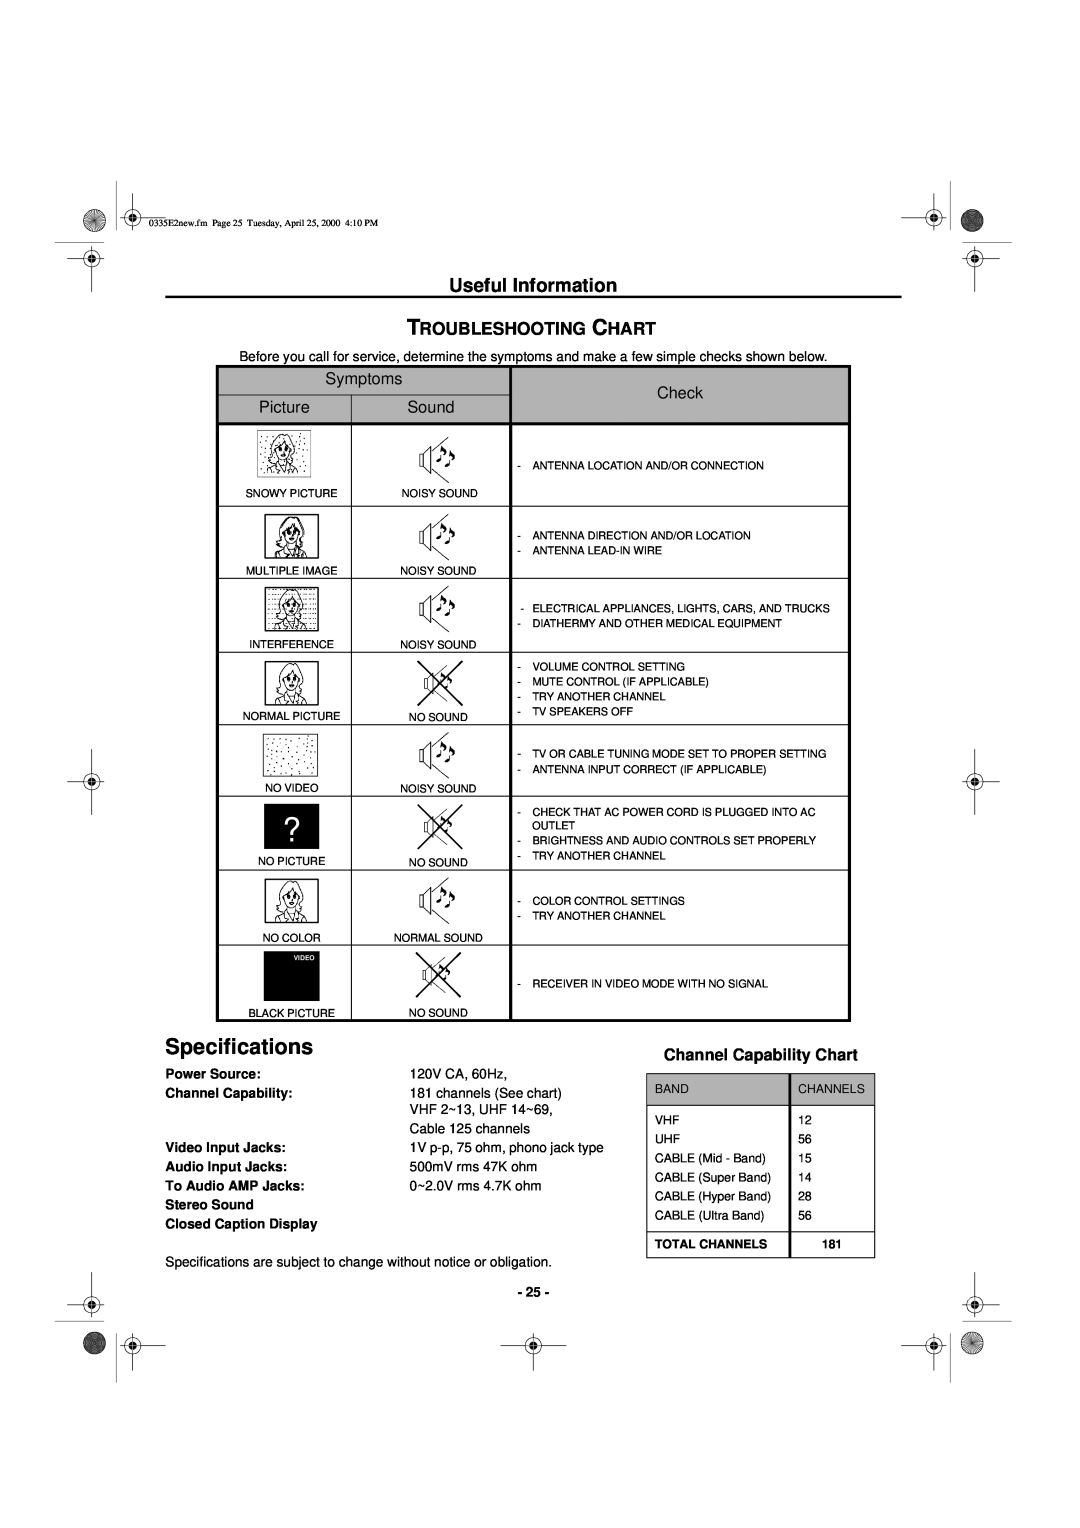 Hitachi 27GX01B manual Specifications, Troubleshooting Chart, Symptoms, Check, Picture, Sound, Channel Capability Chart 